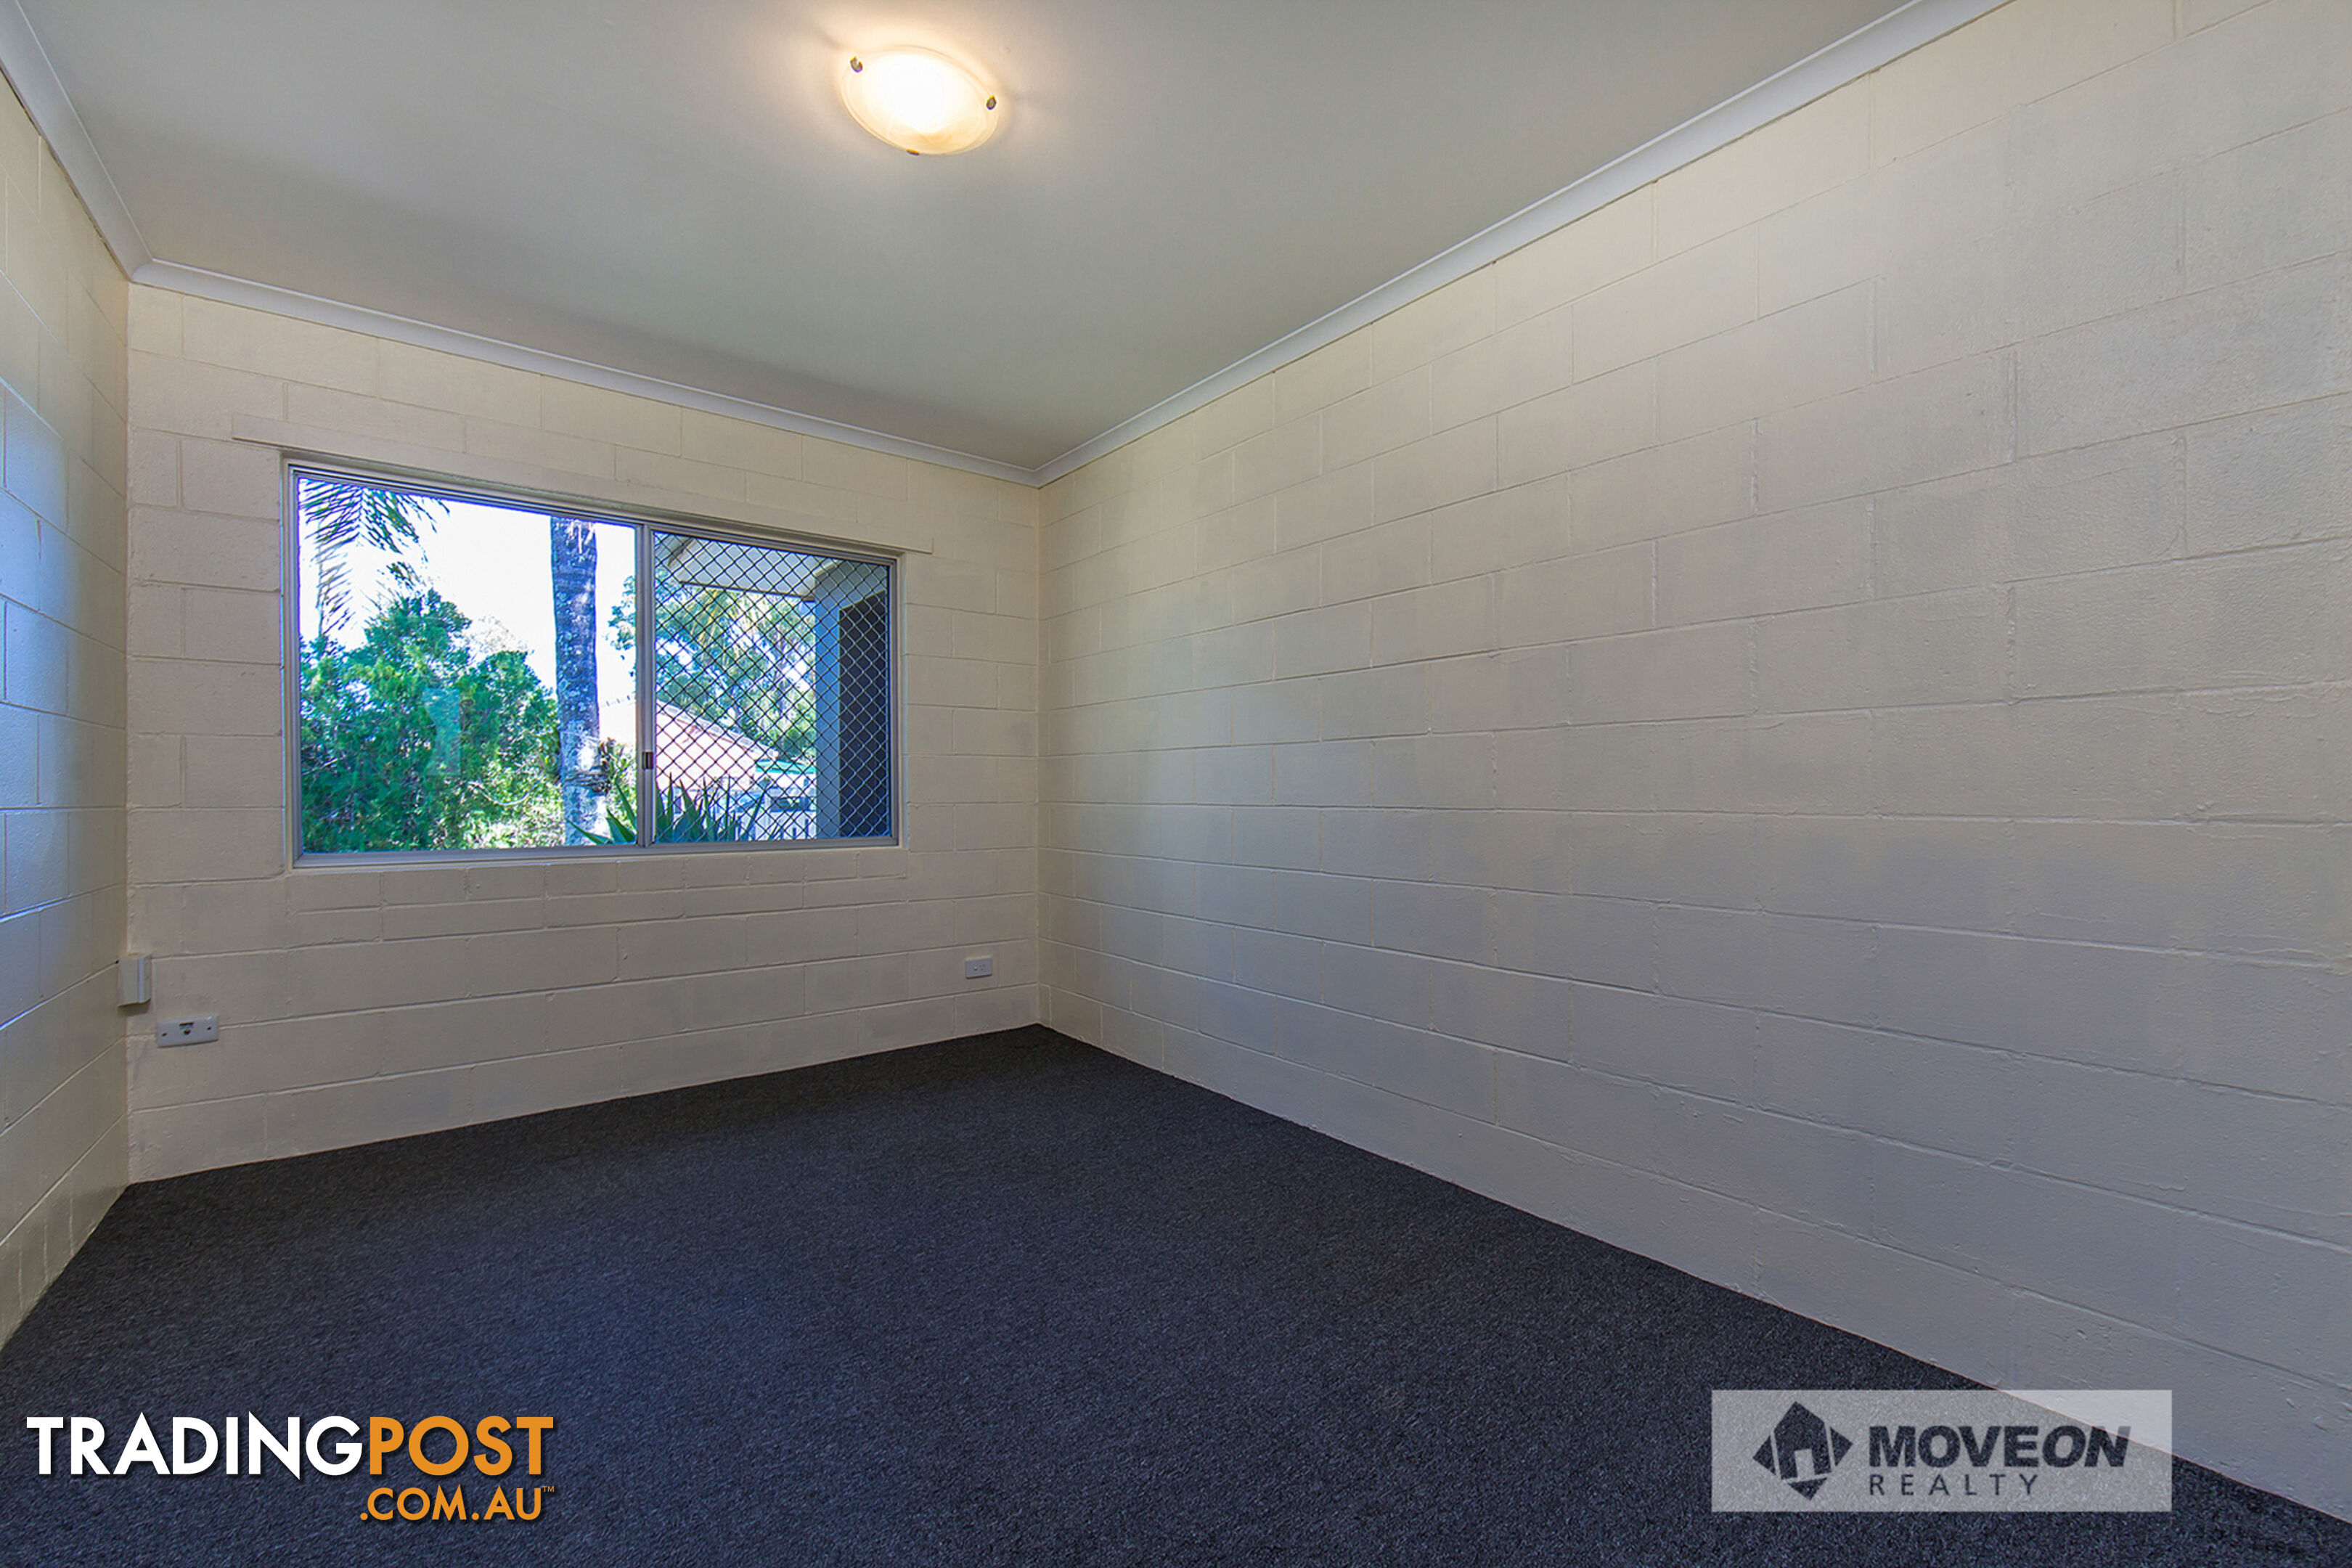 18 ANSELL AVE DECEPTION BAY QLD 4508